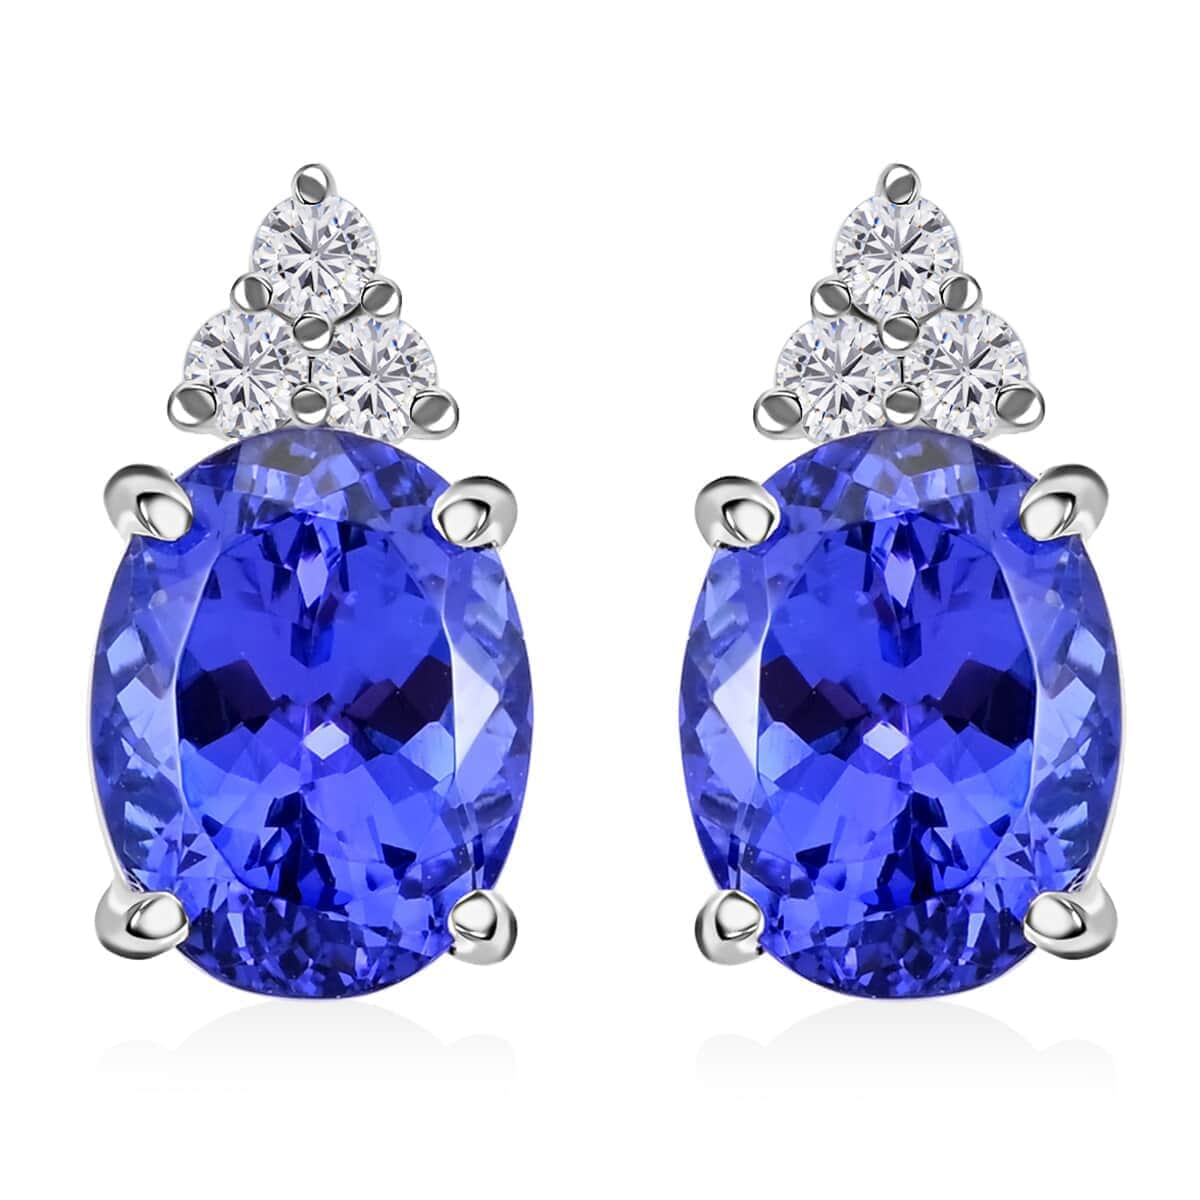 Rhapsody Certified and Appraised AAAA Tanzanite Earrings, E-F VS Diamond Accent Earrings, 950 Platinum Earrings, Tanzanite Gifts For Her  4.15 Grams 3.25 ctw image number 0